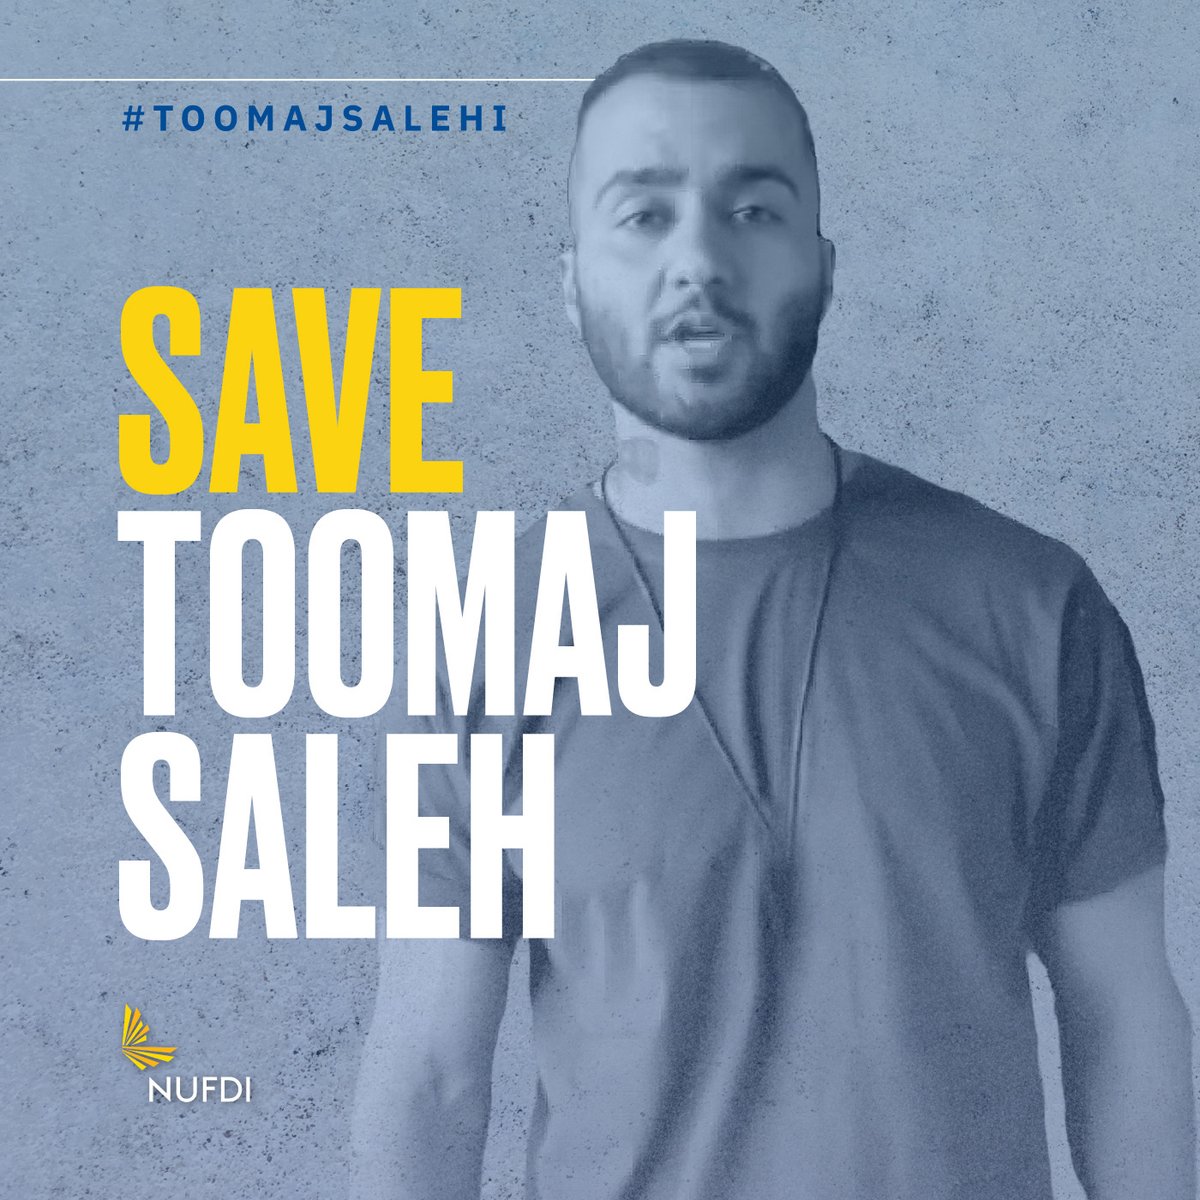 The Islamic Republic is threatening to murder dissident rapper, #ToomajSalehi. It is trying to scare the people of #Iran. He is facing execution for rapping against the Islamic Republic and the regime's lobbyists and propagandists in the West. Be his voice. #توماج_صالحی